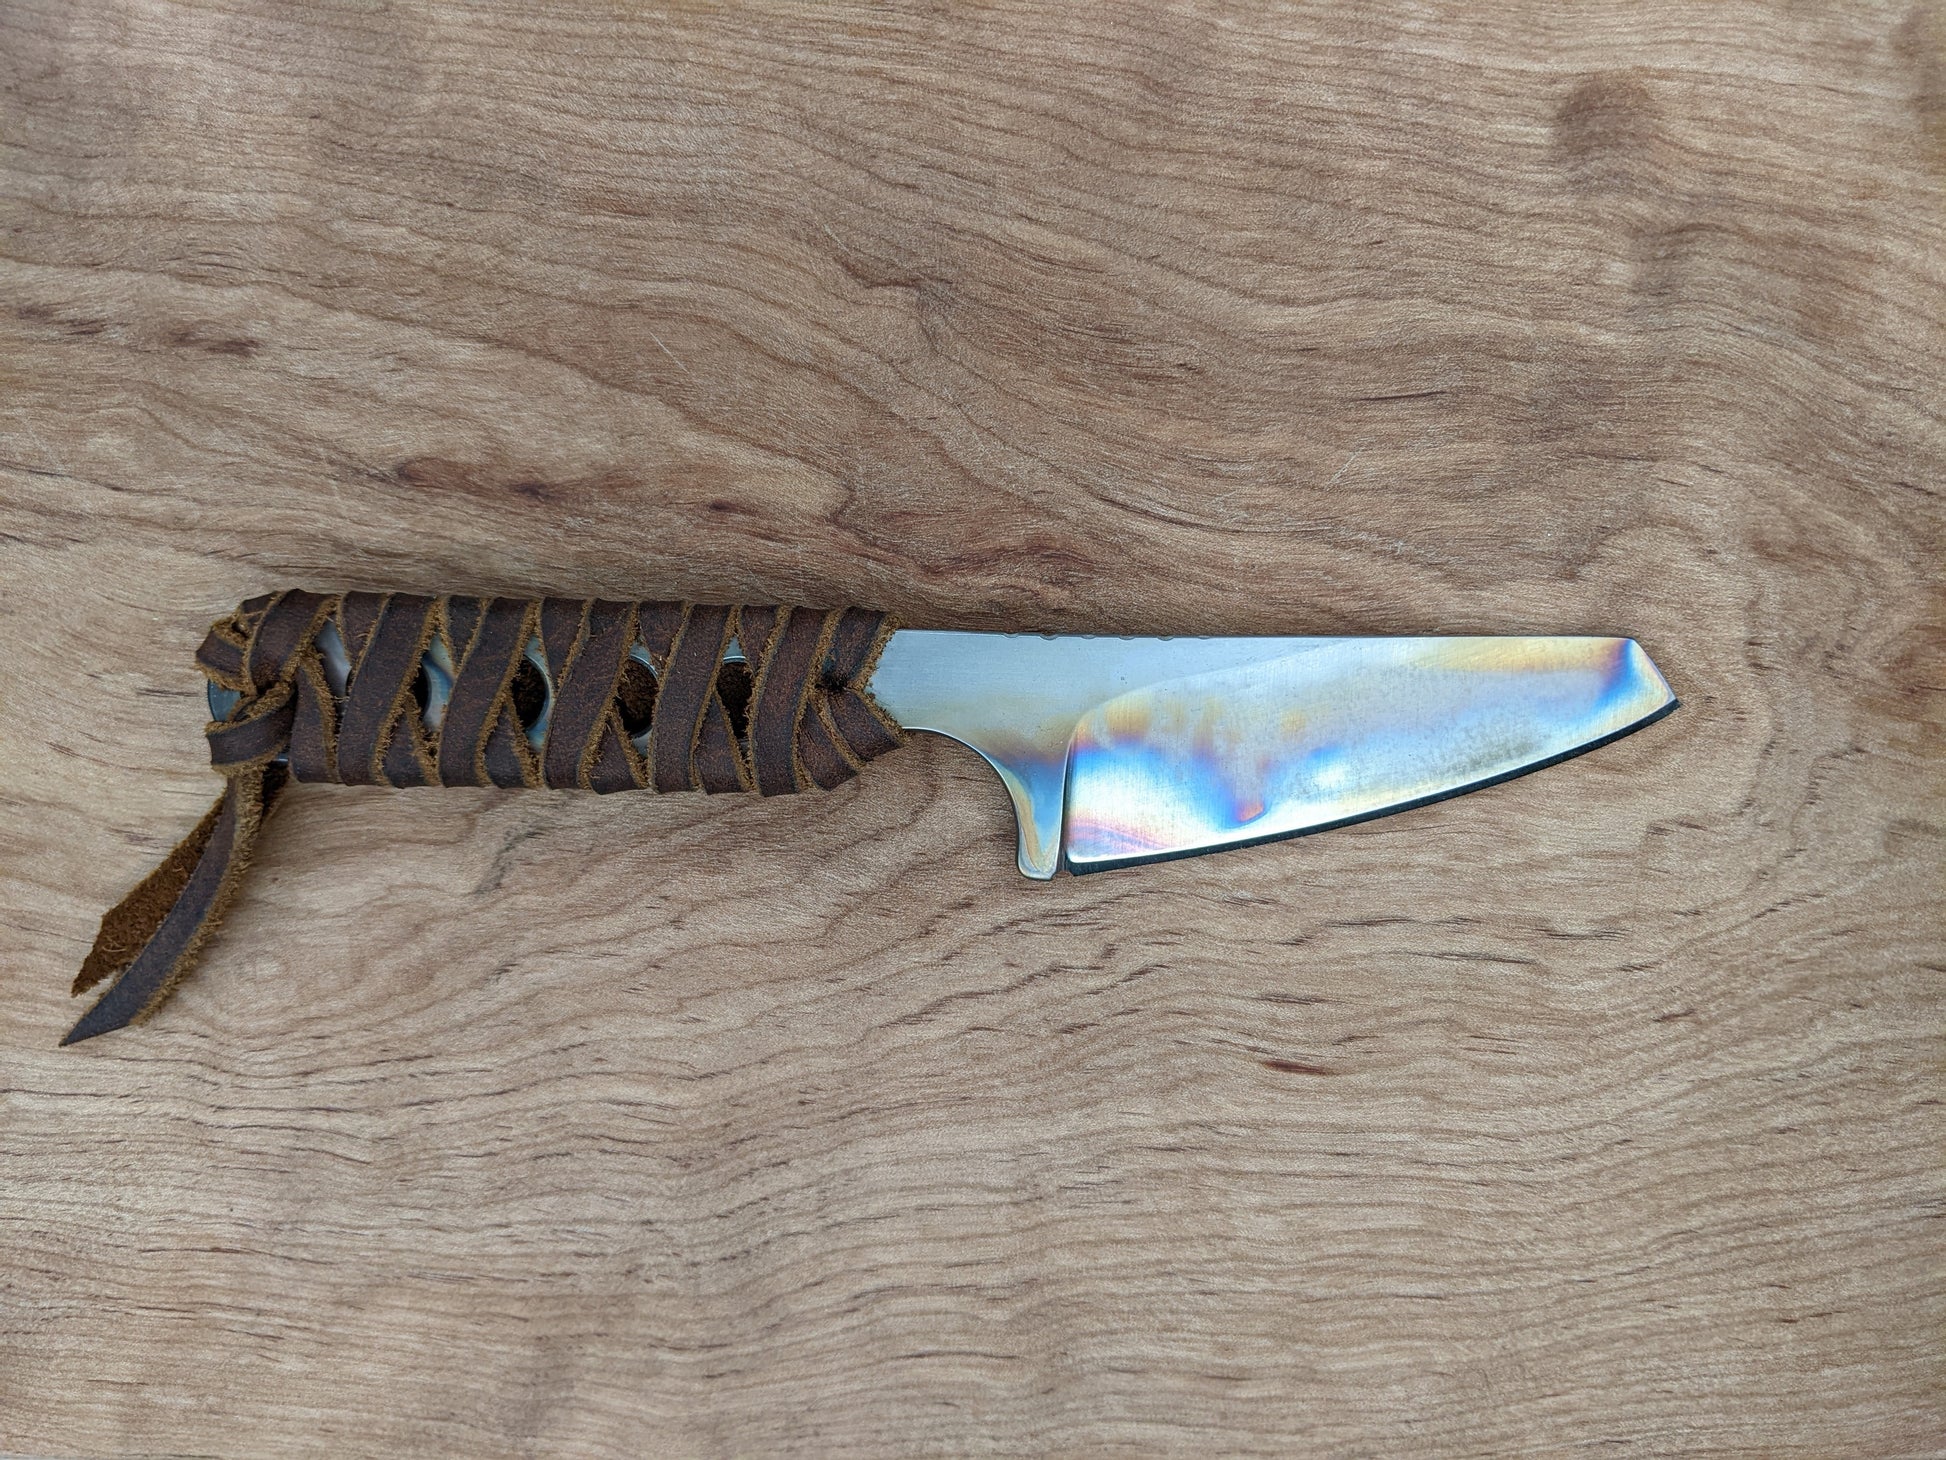 small knife with heat-treating colors and leather wrapped handle on a wooden background